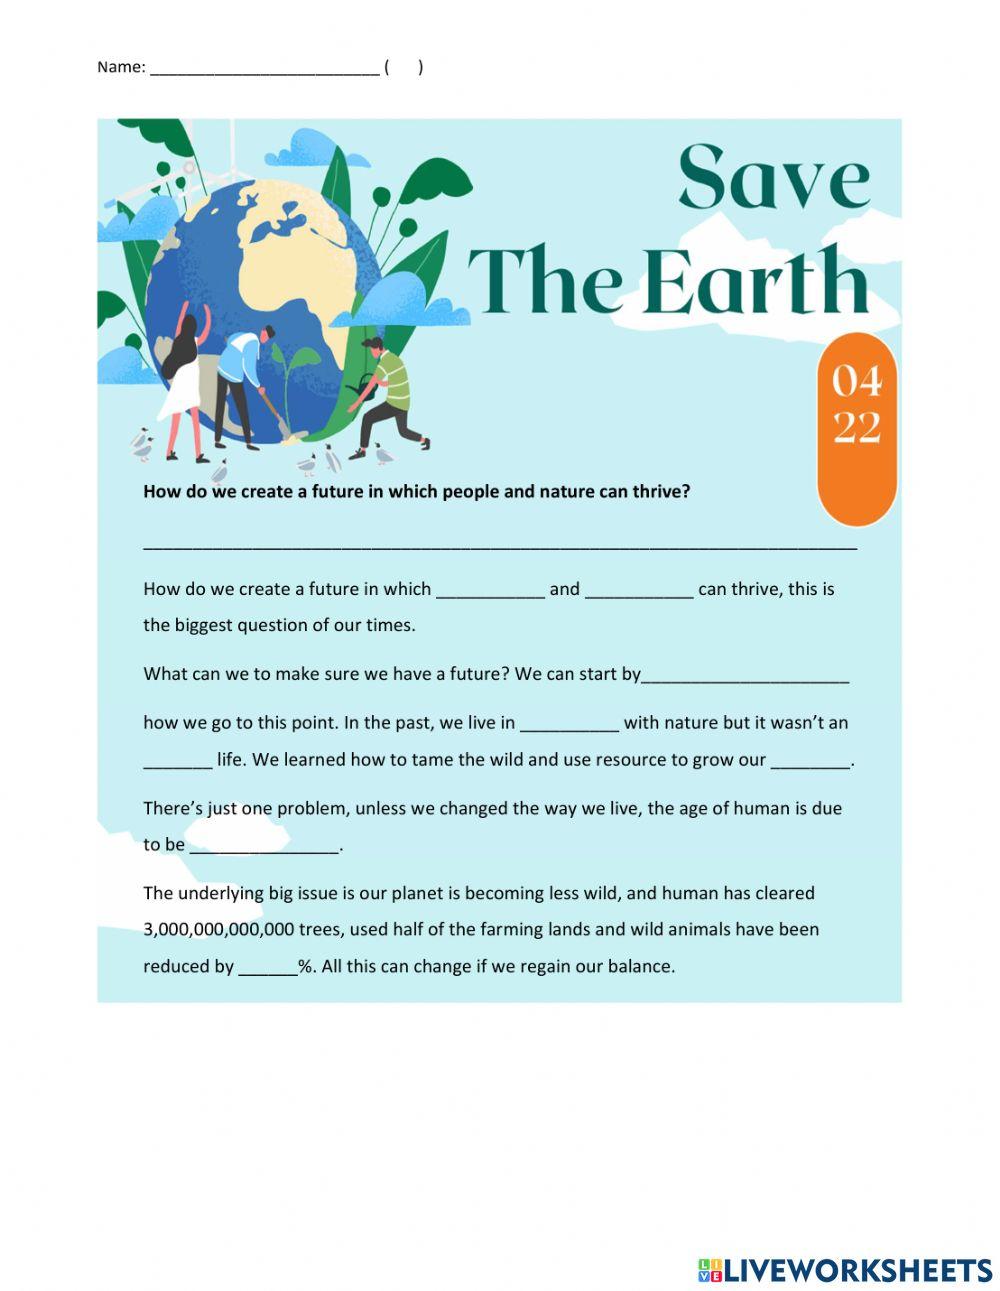 Save the Planet